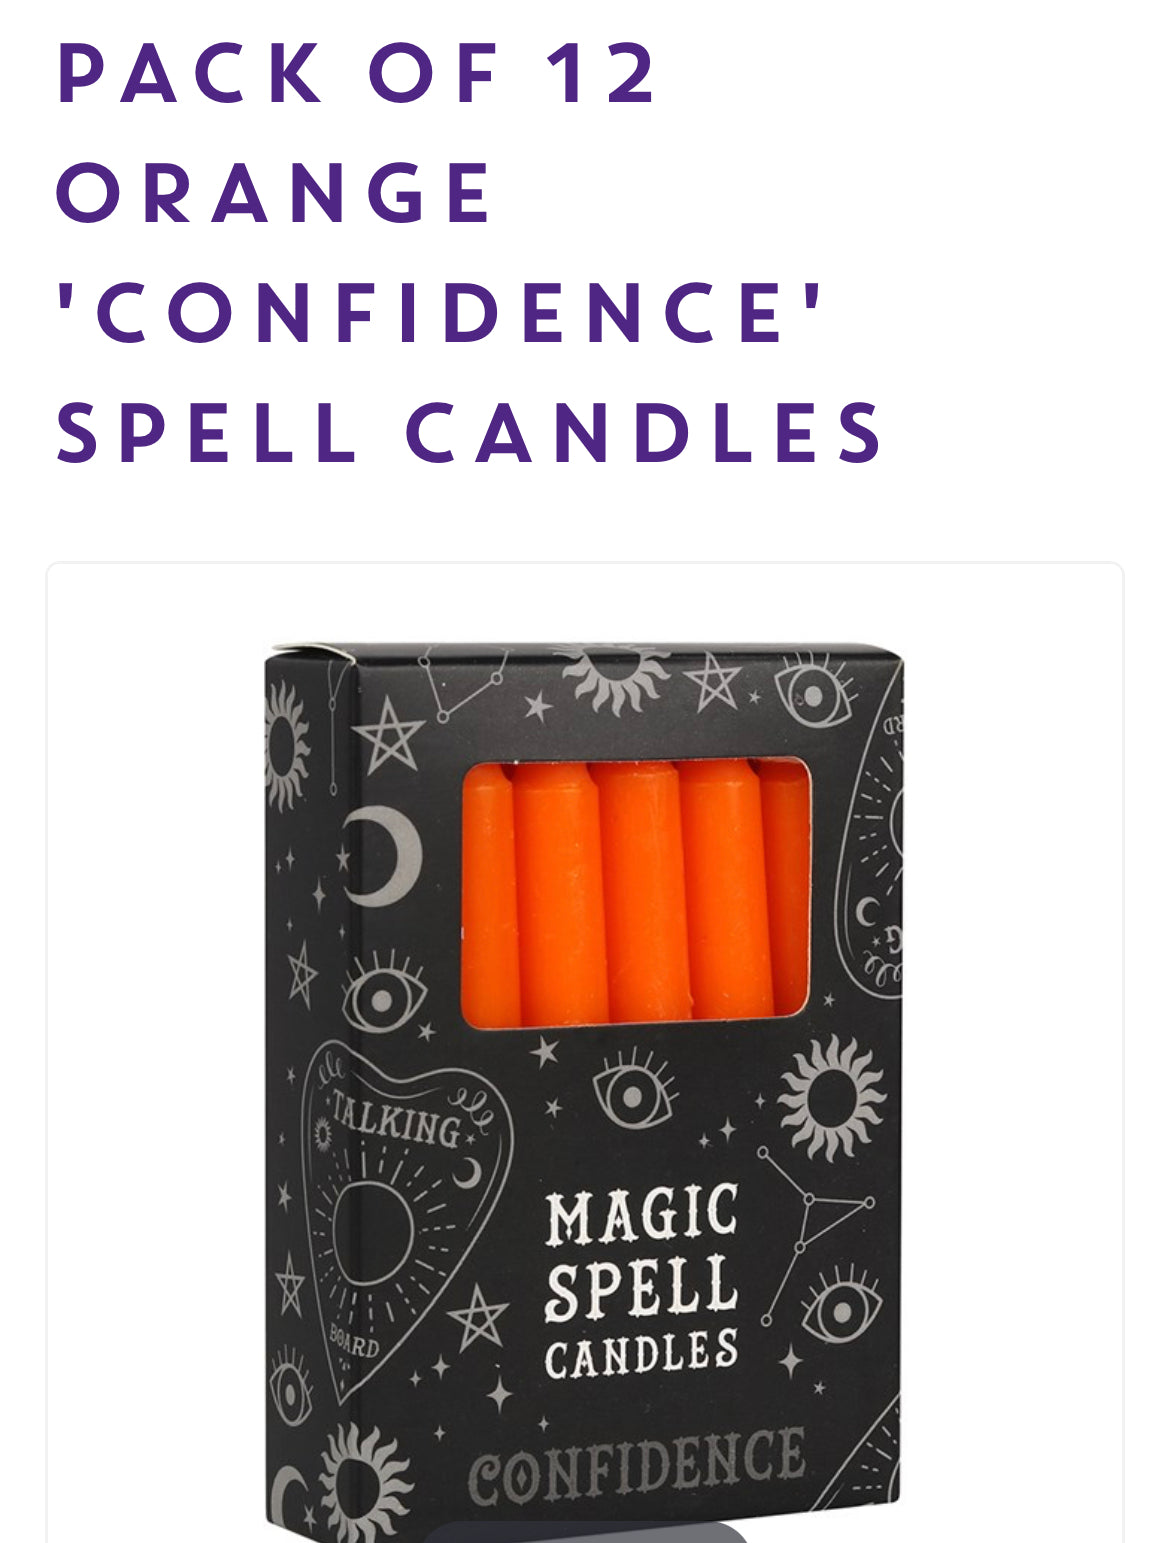 Confidence Spell Candles